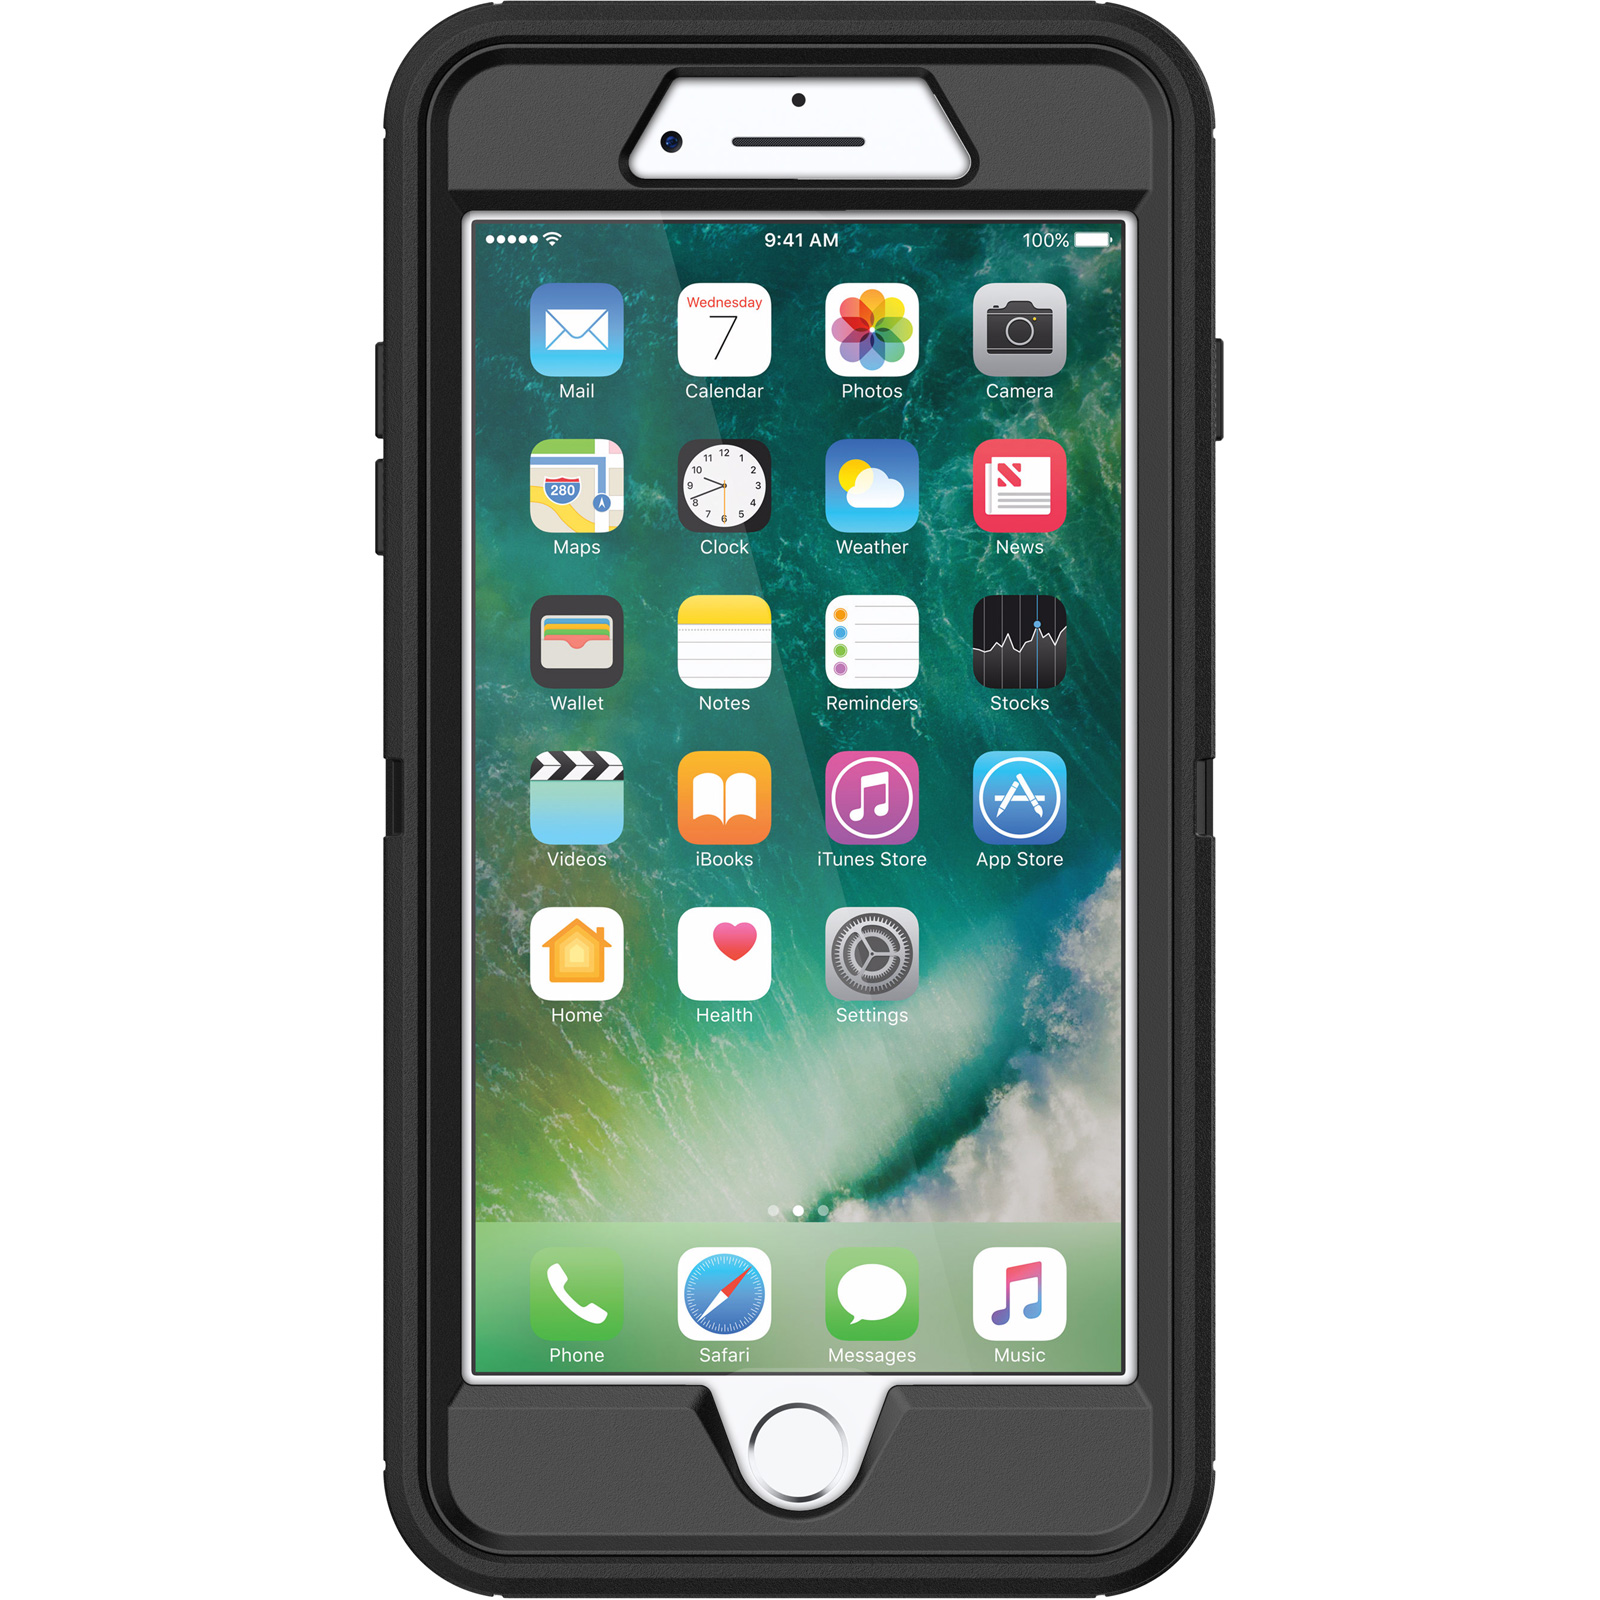 OtterBox - Defender Series Pro Hard Shell Case for Apple iPhone 7, 8 and SE (2nd Generation) - Black